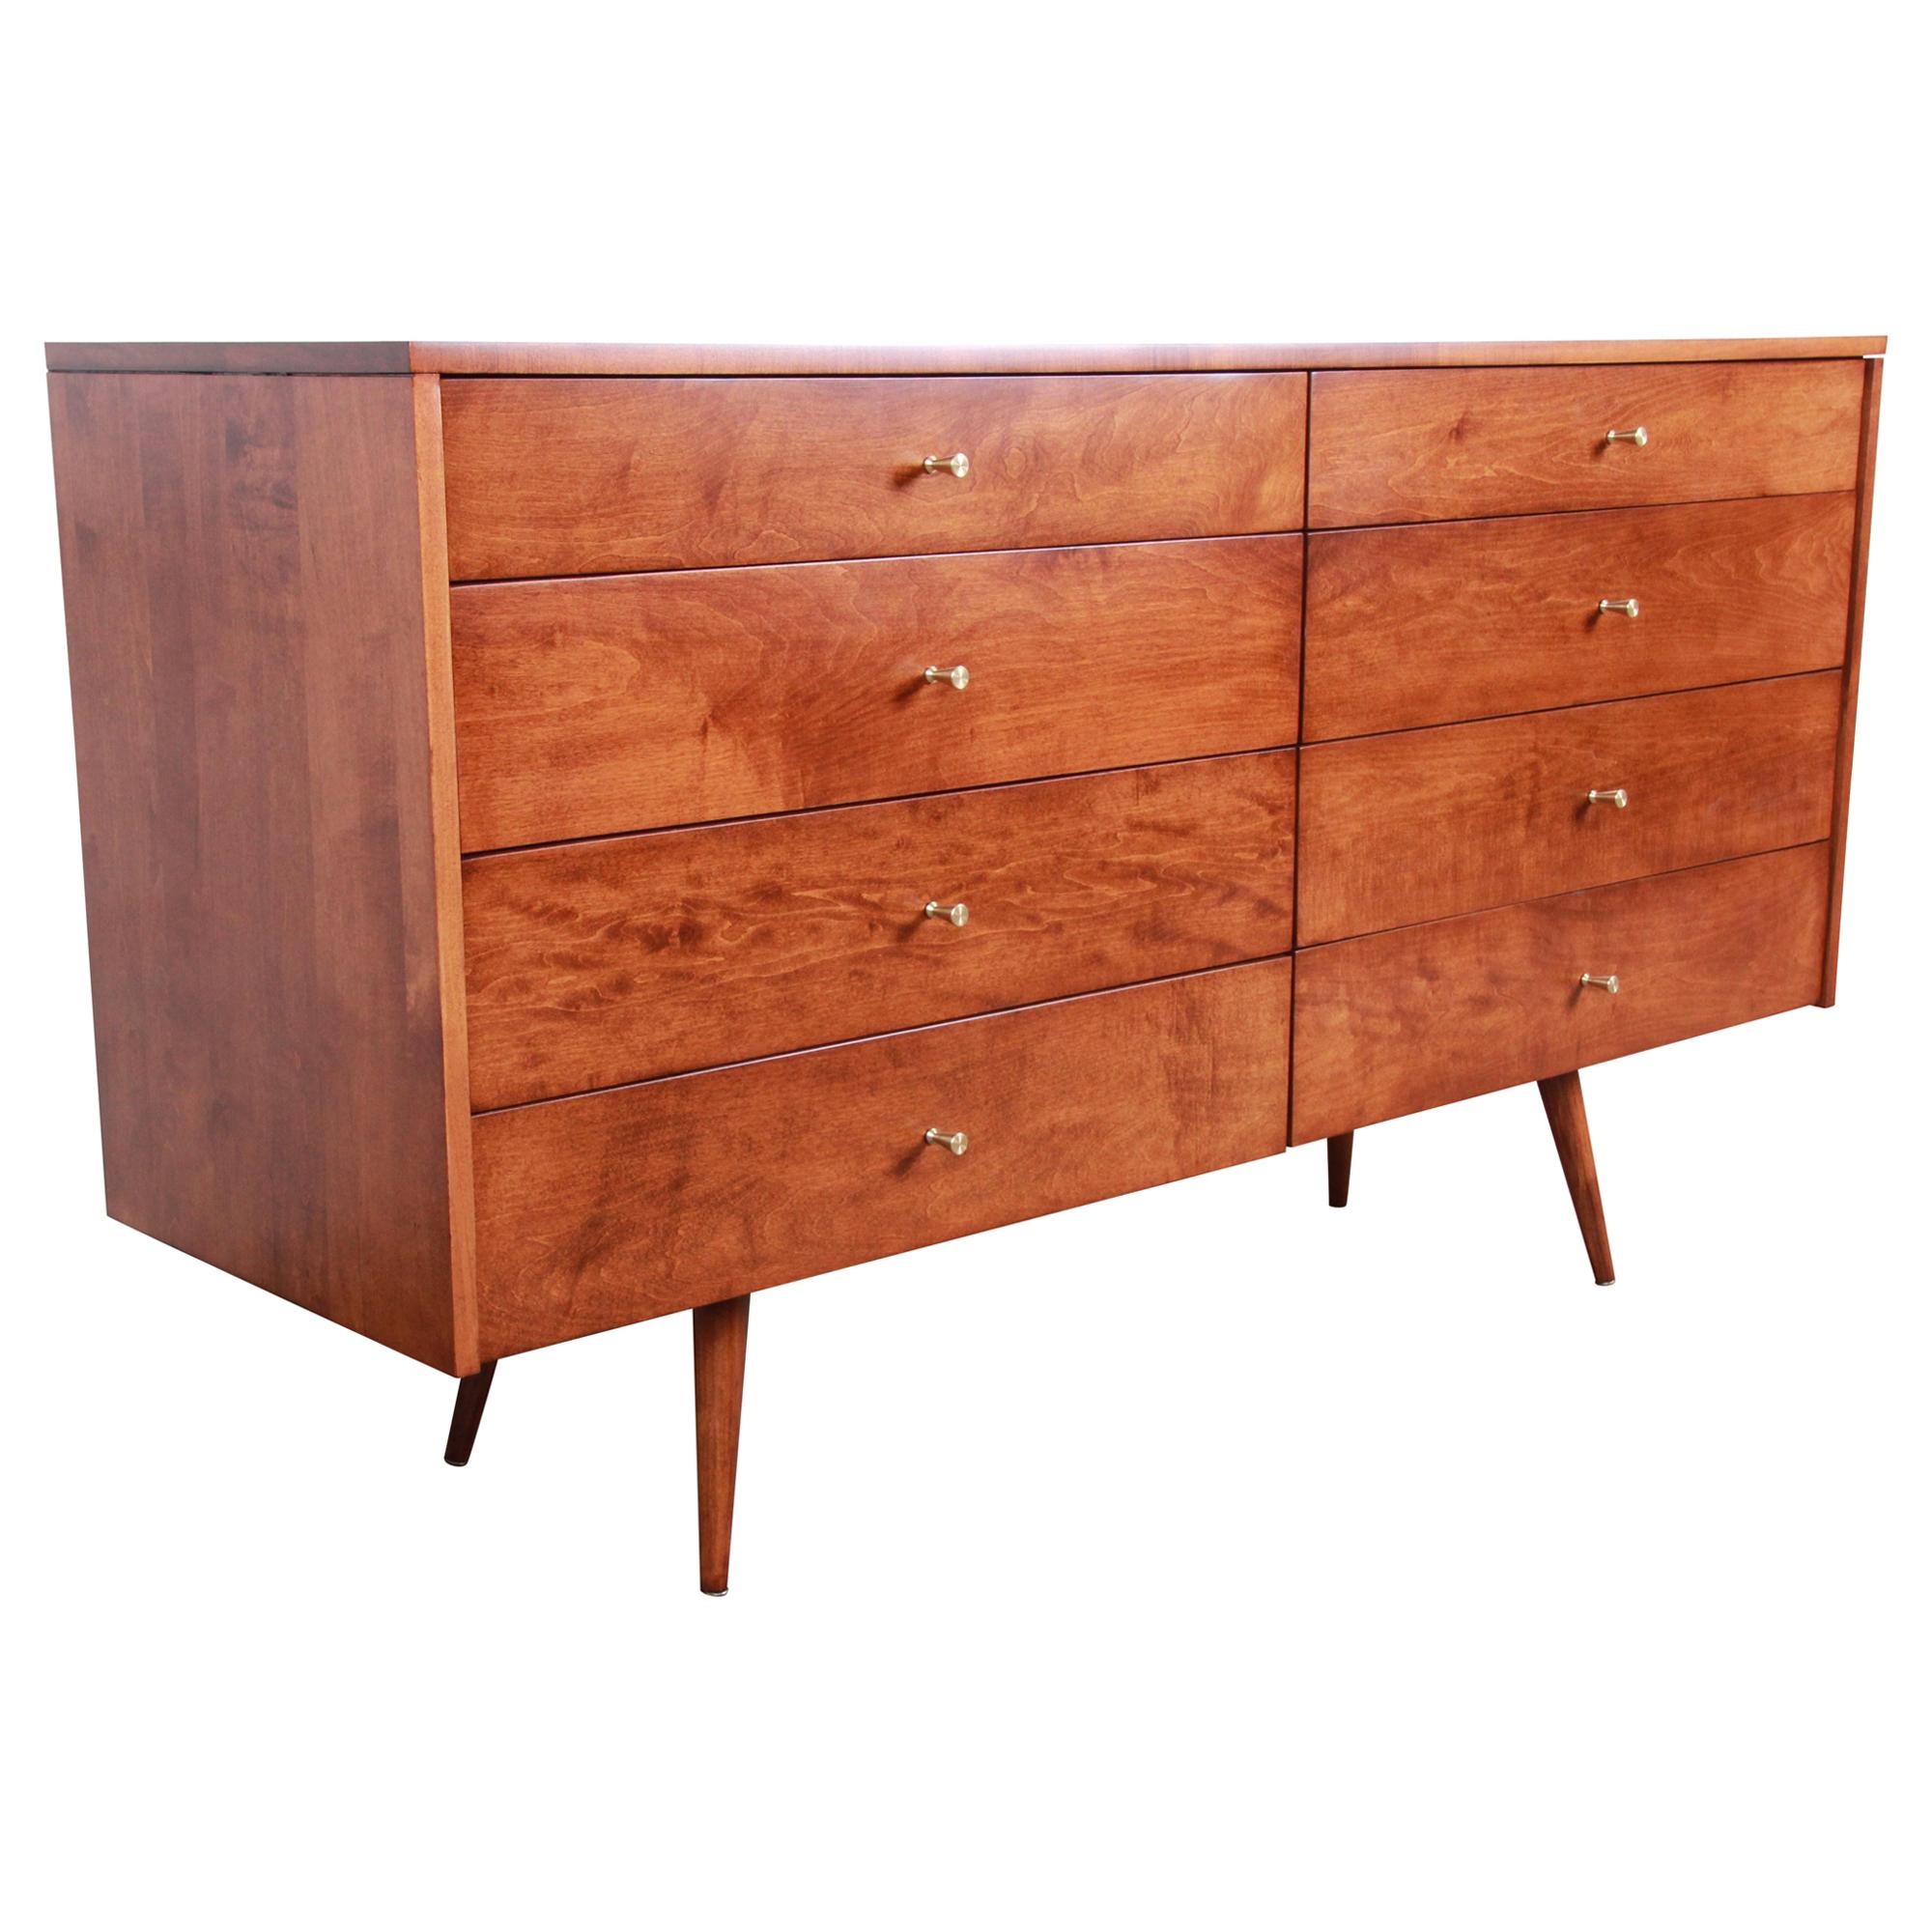 Paul McCobb Planner Group Mid-Century Long Dresser or Credenza, Newly Restored